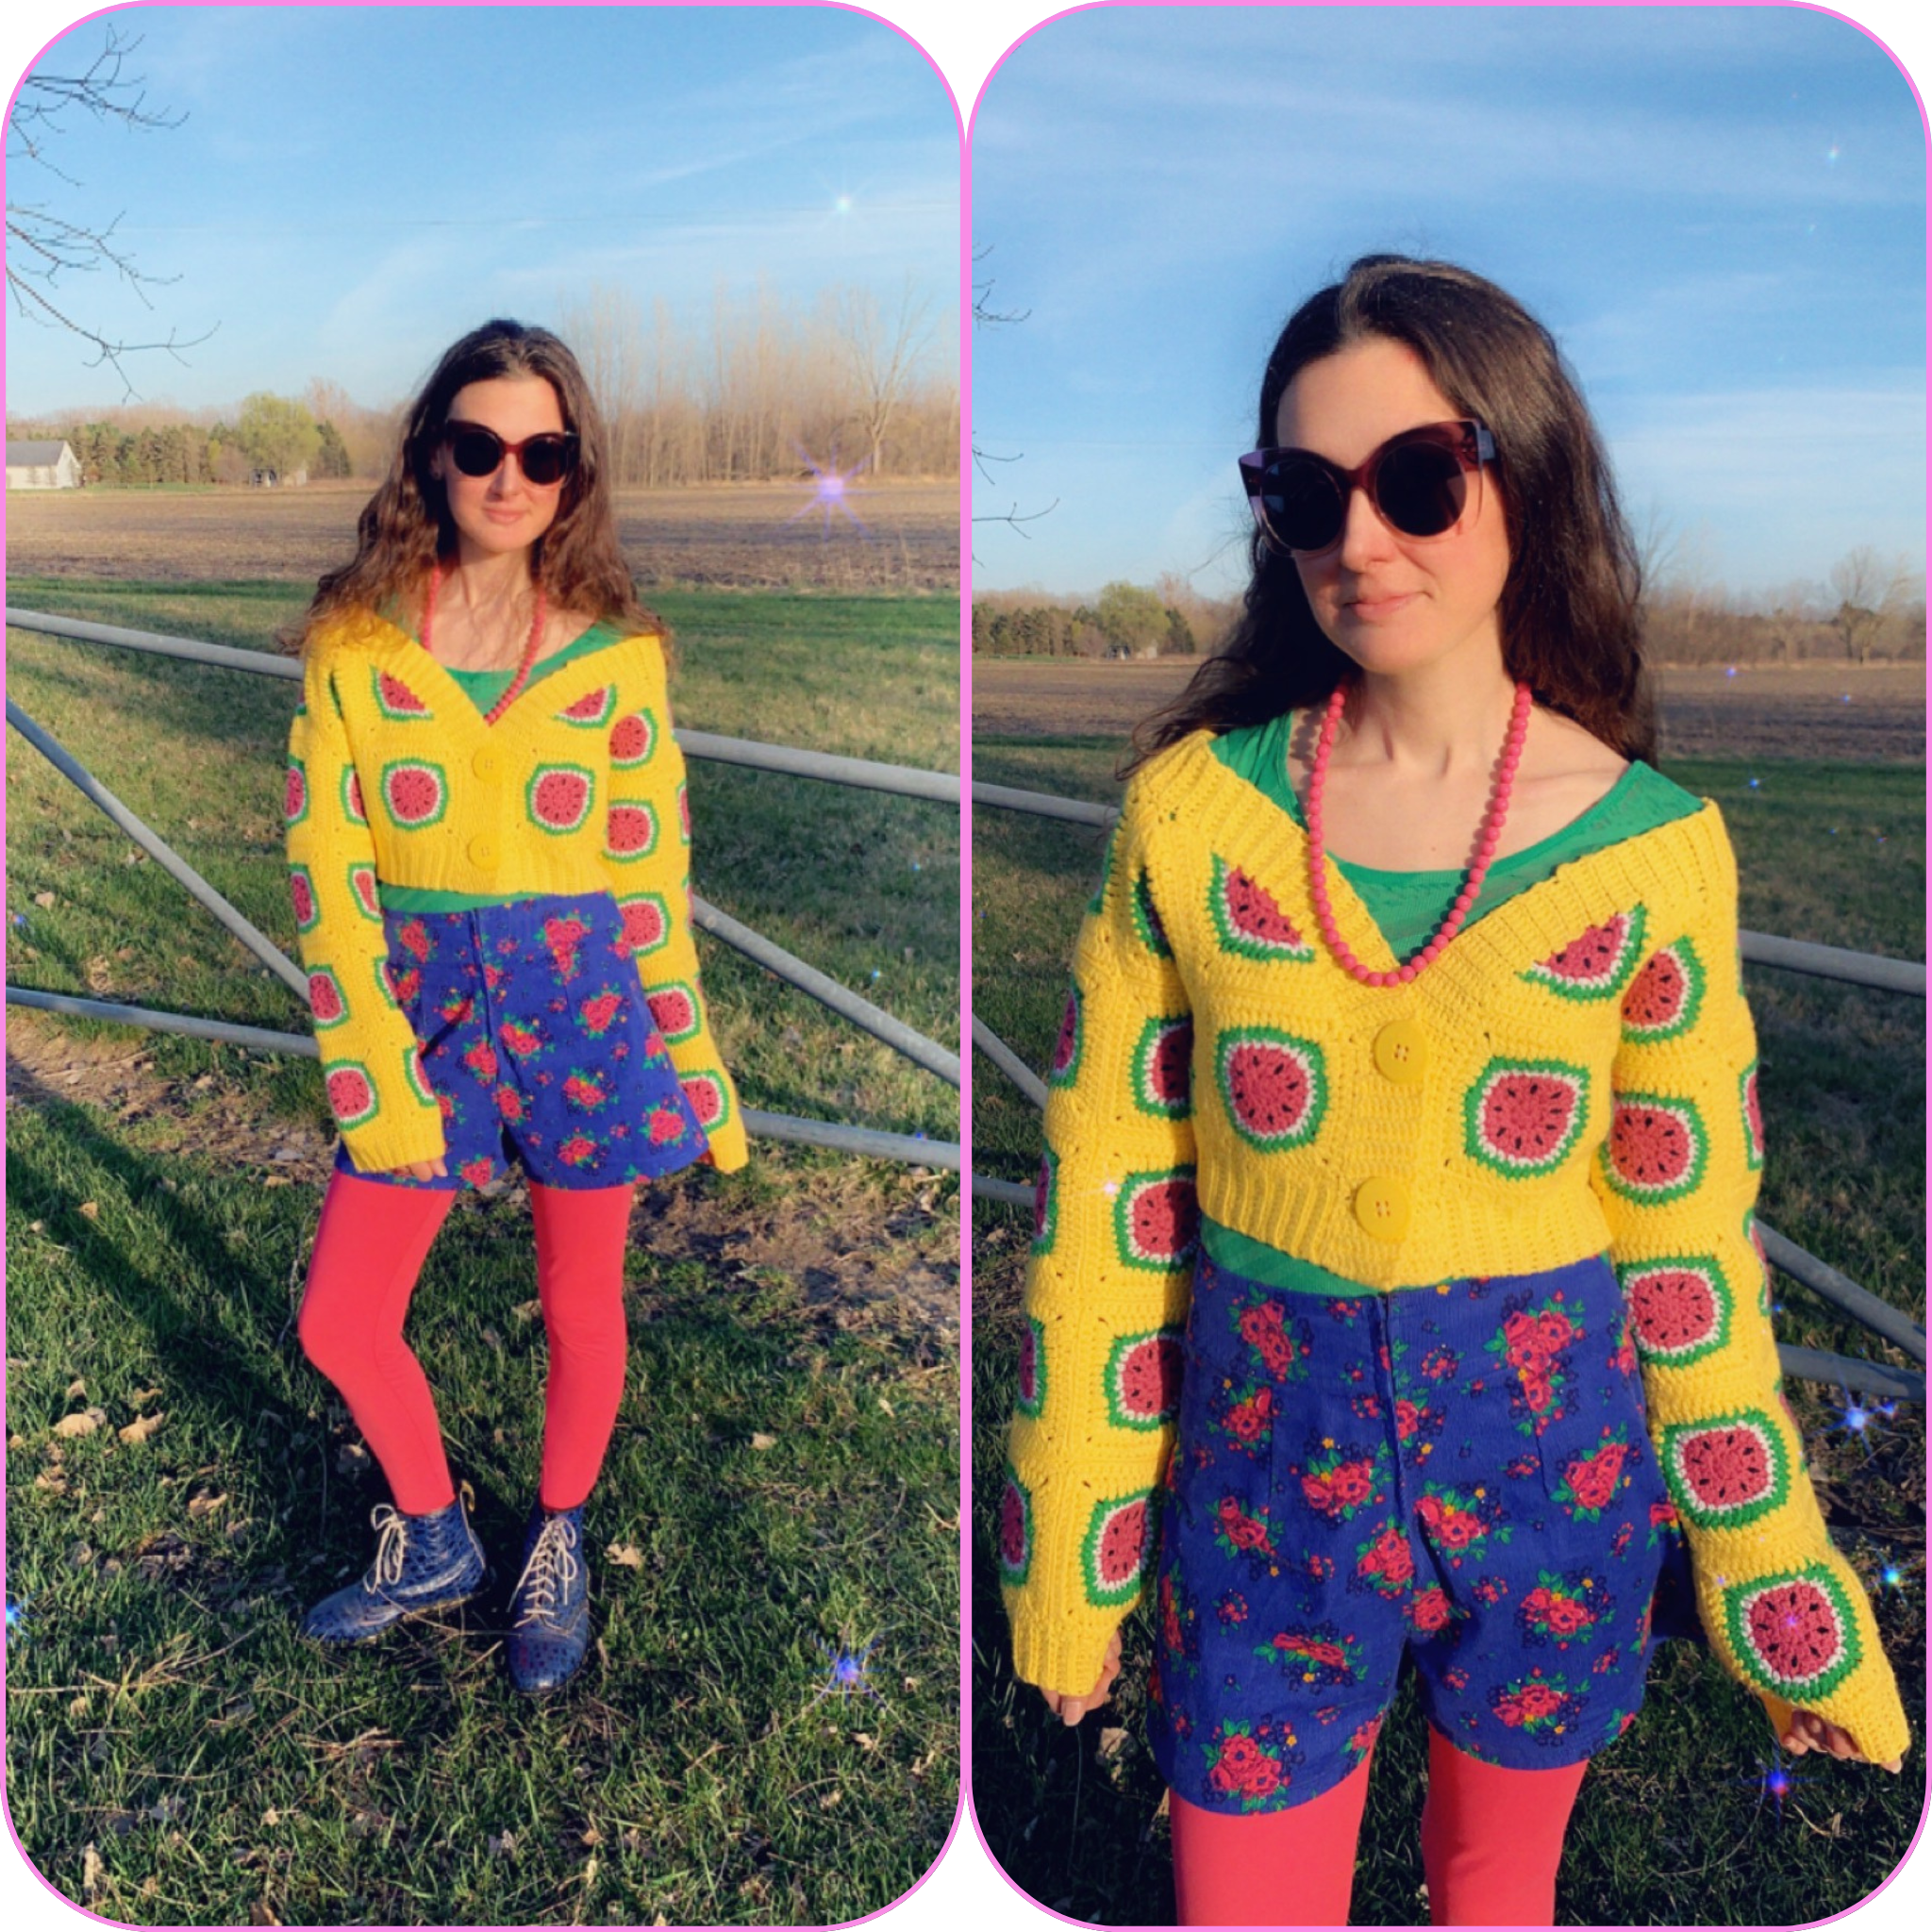 woman wearing a bright yellow cardigan sweater with a watermelon motif and bright floral corduroy shorts, standing in front of the gate to a farm field.